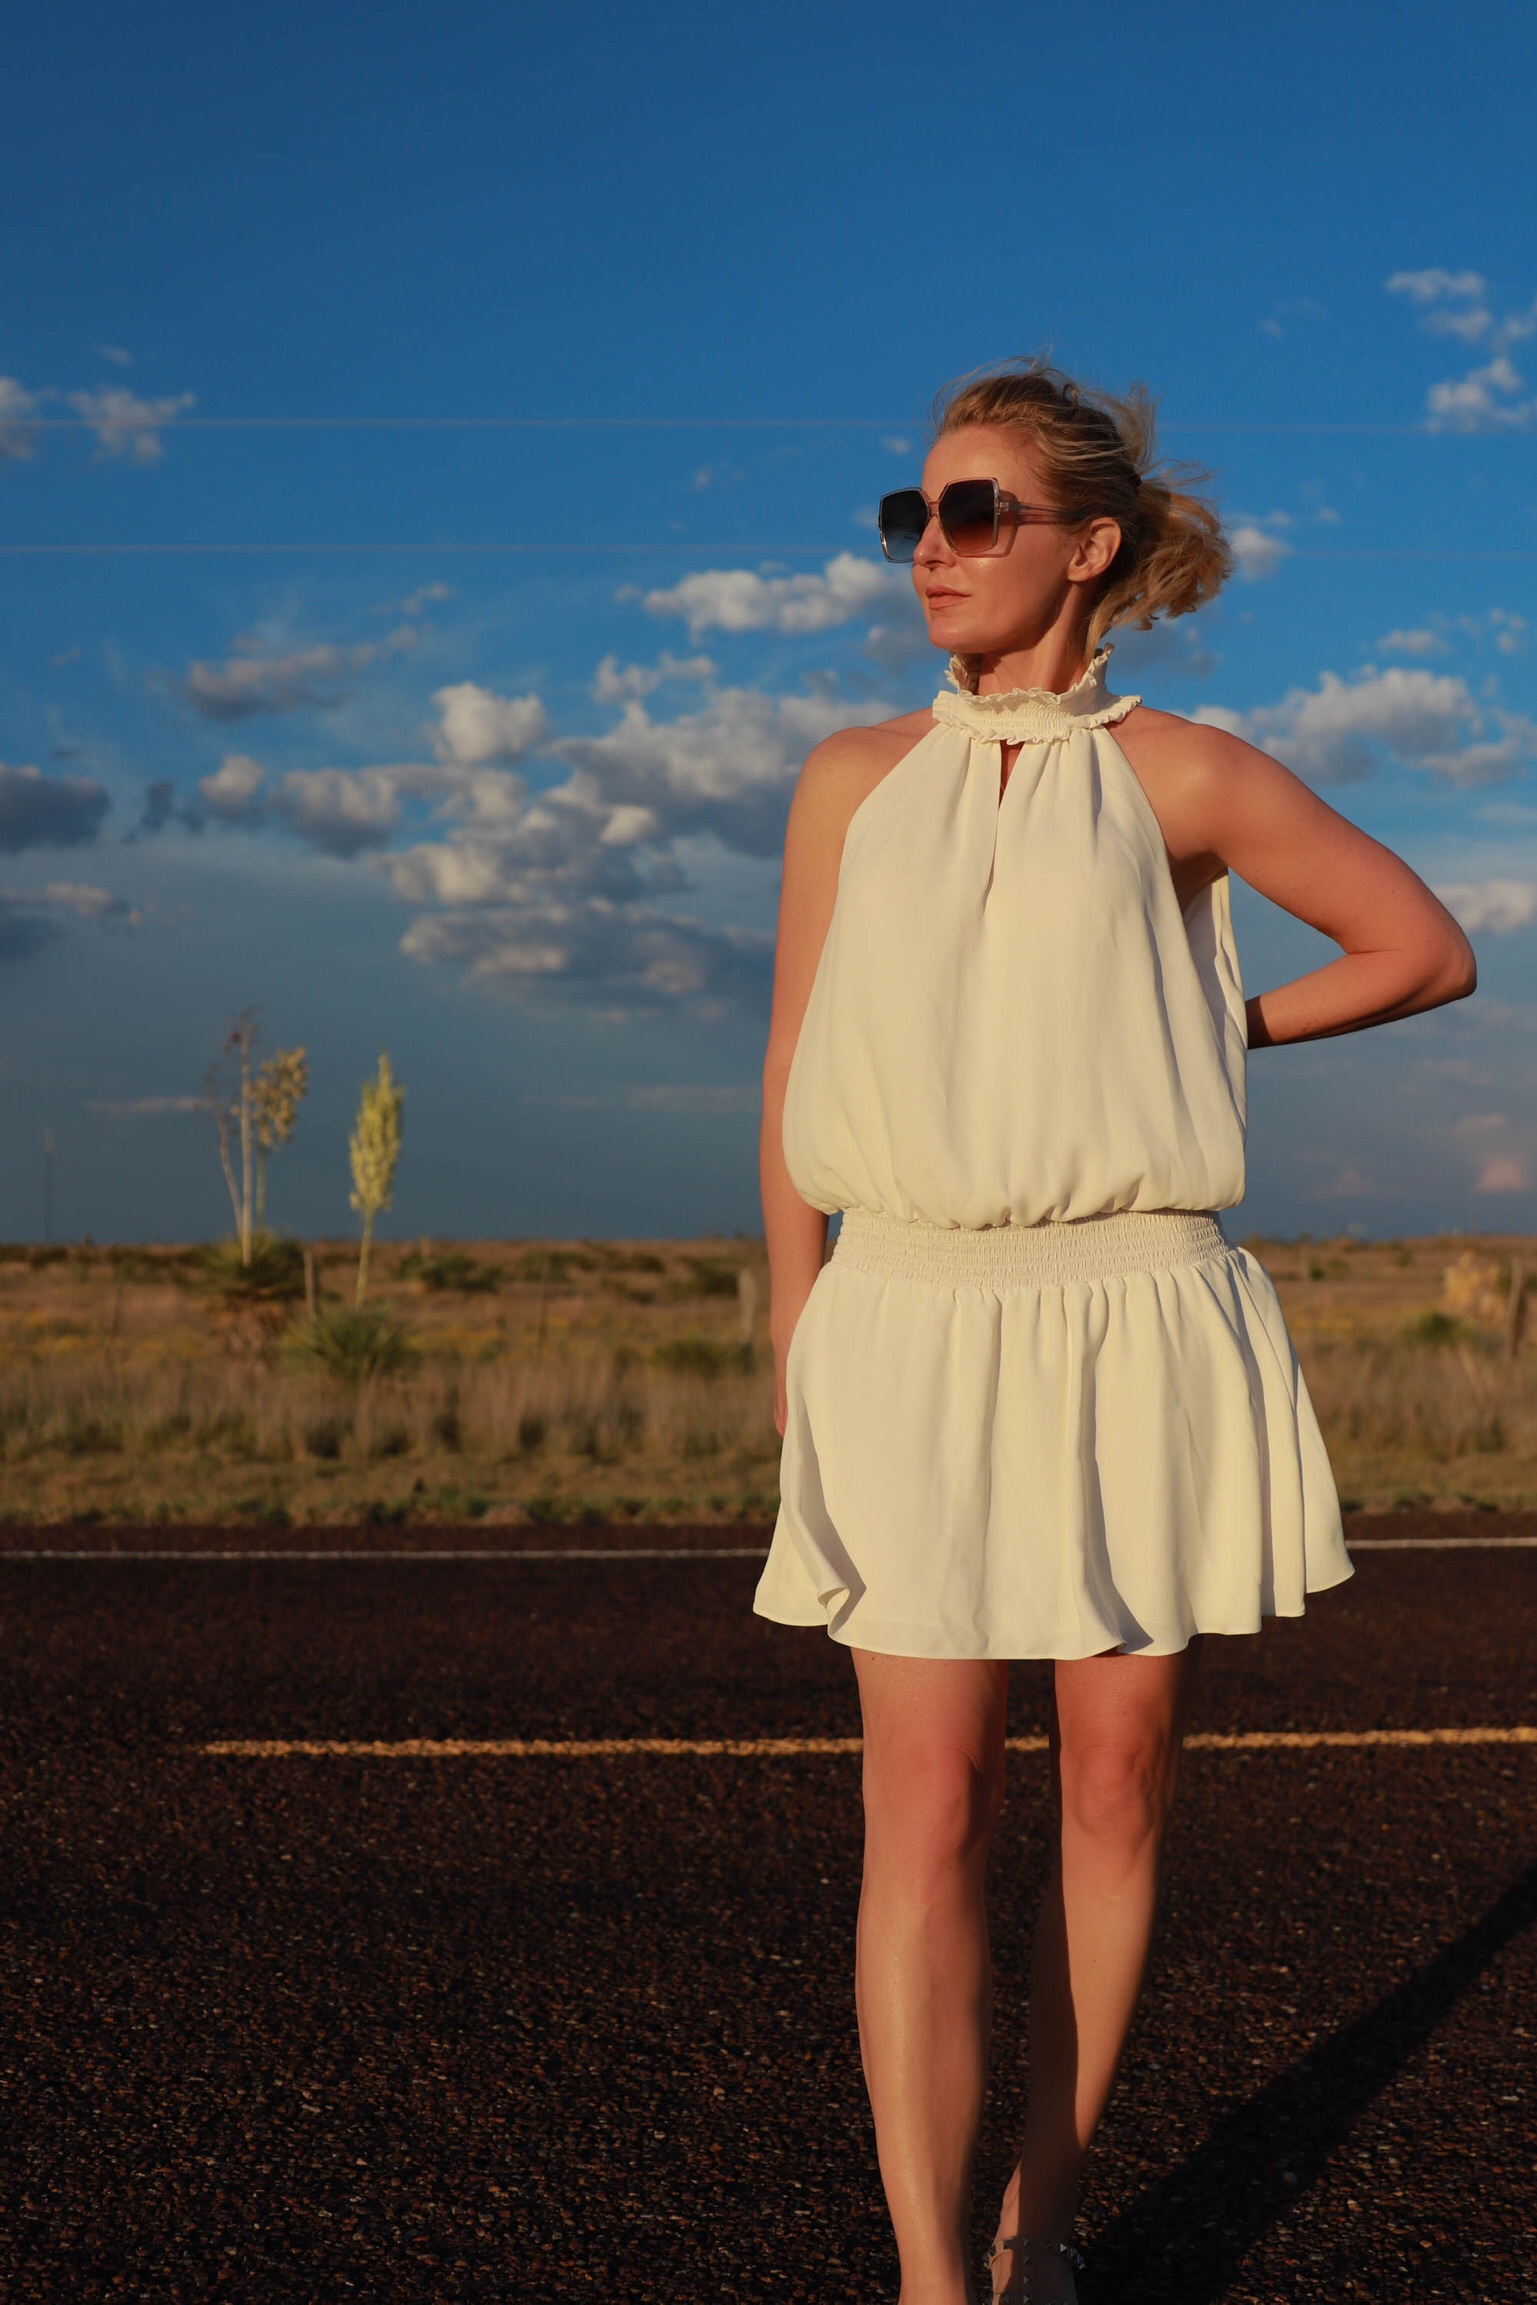 Dress For Summer, Fashion blogger Erin Busbee of Busbee Style wearing a white smocked waist high neck dress by Amanda Uprichard dress with a Julie Vos cuff bracelet, Saint Laurent sunglasses, and Valentino sandals in south Texas